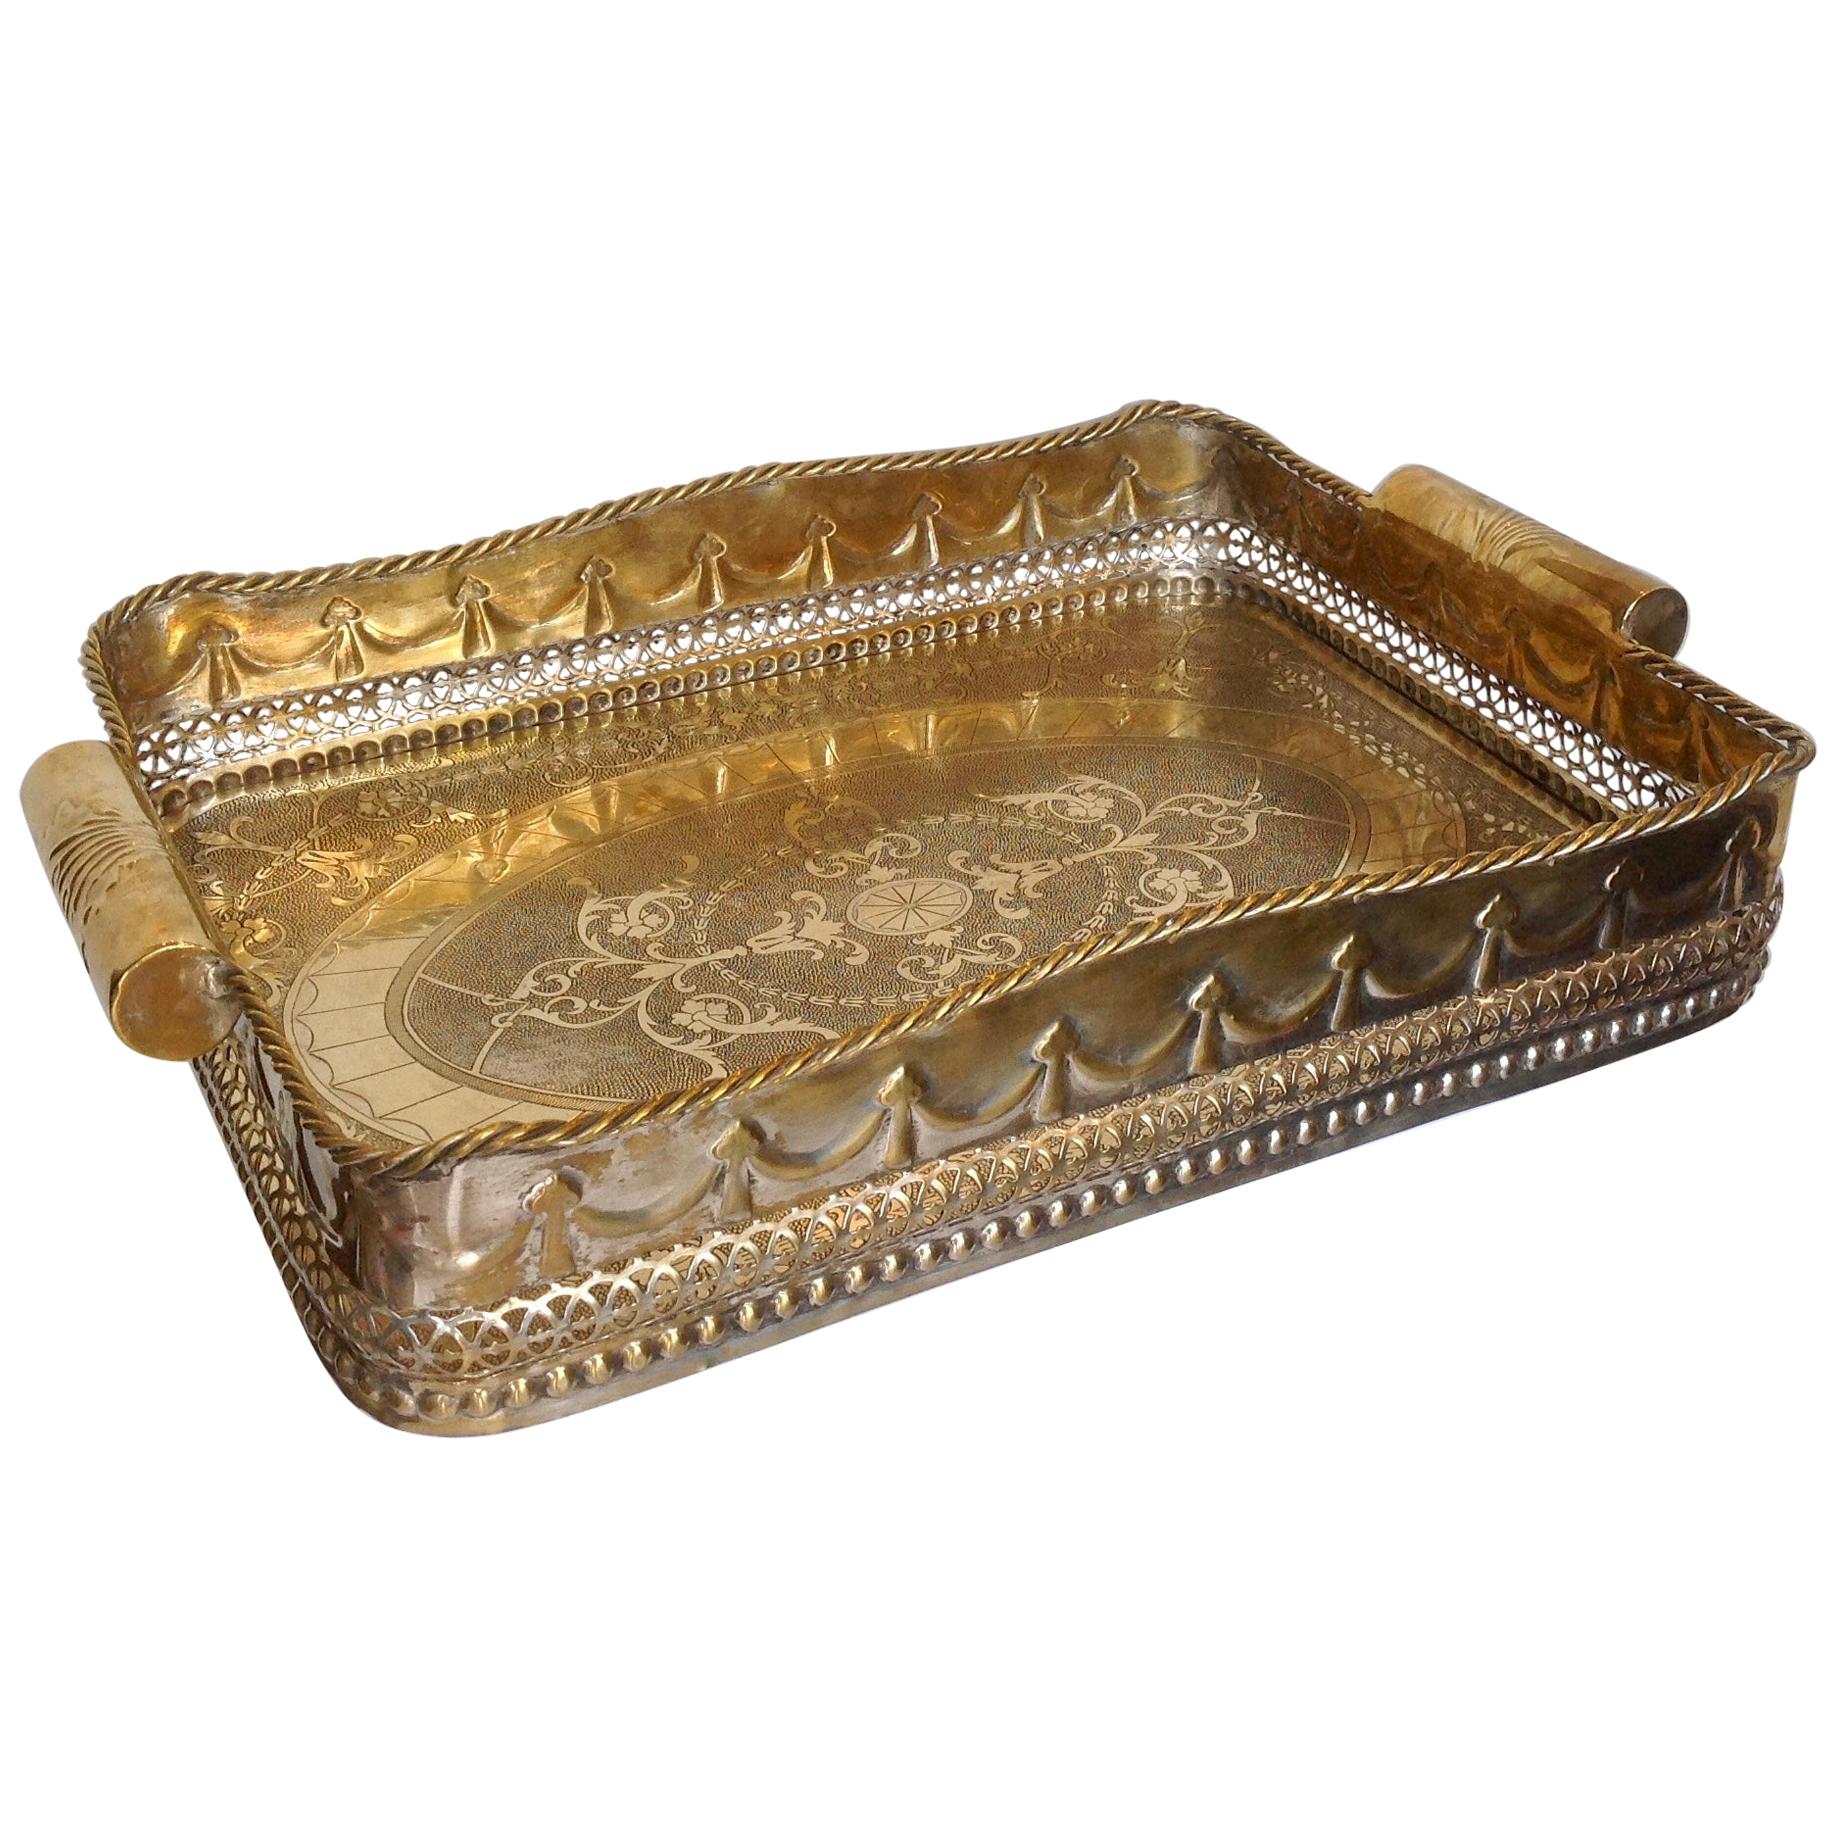 Anglo-Indian Butler's Tray